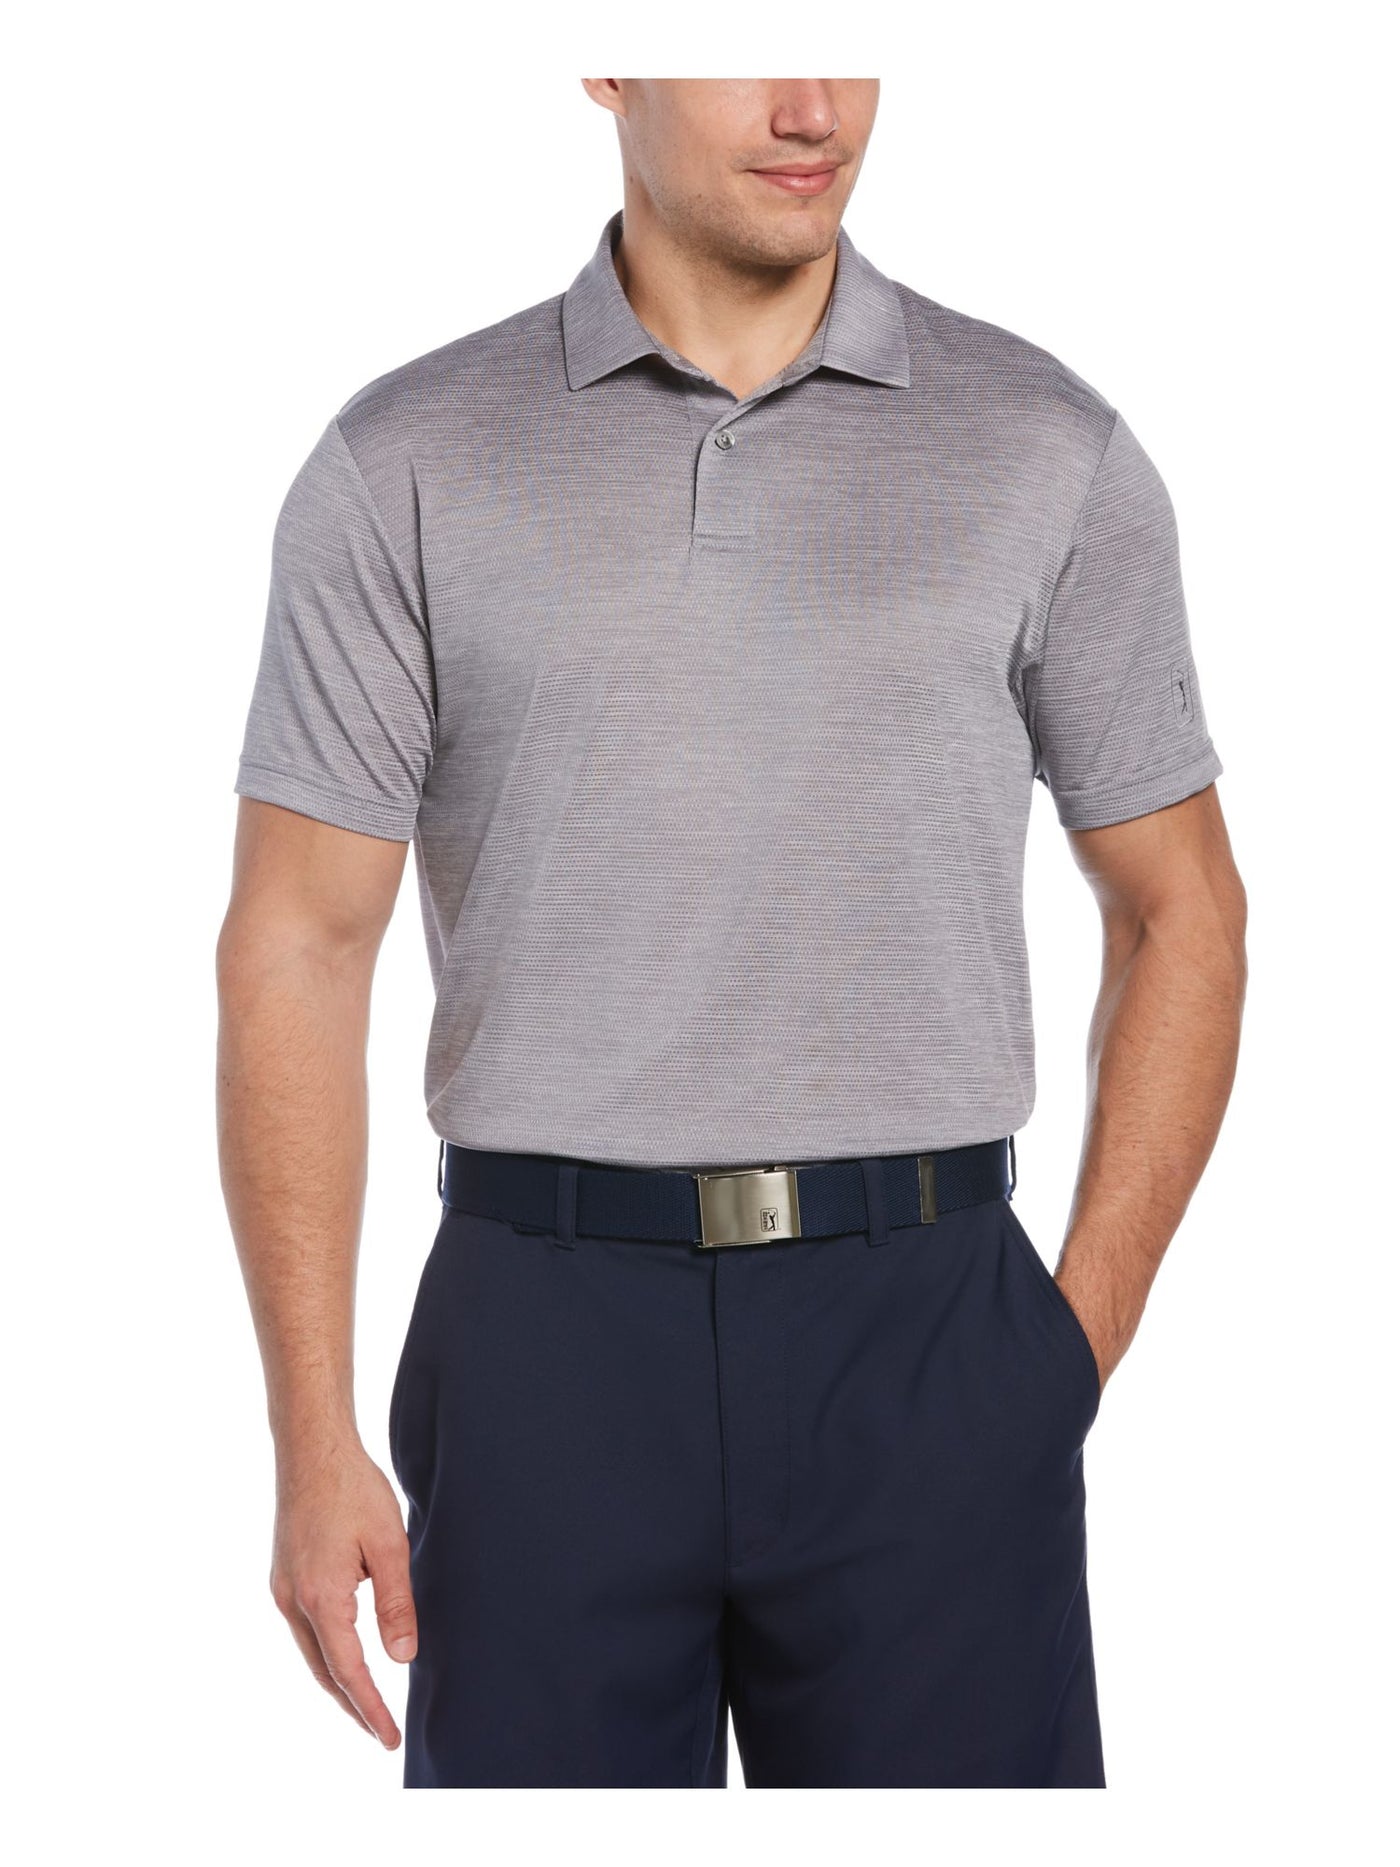 HYBRID APPAREL Mens Gray Heather Short Sleeve Classic Fit Moisture Wicking Polo M